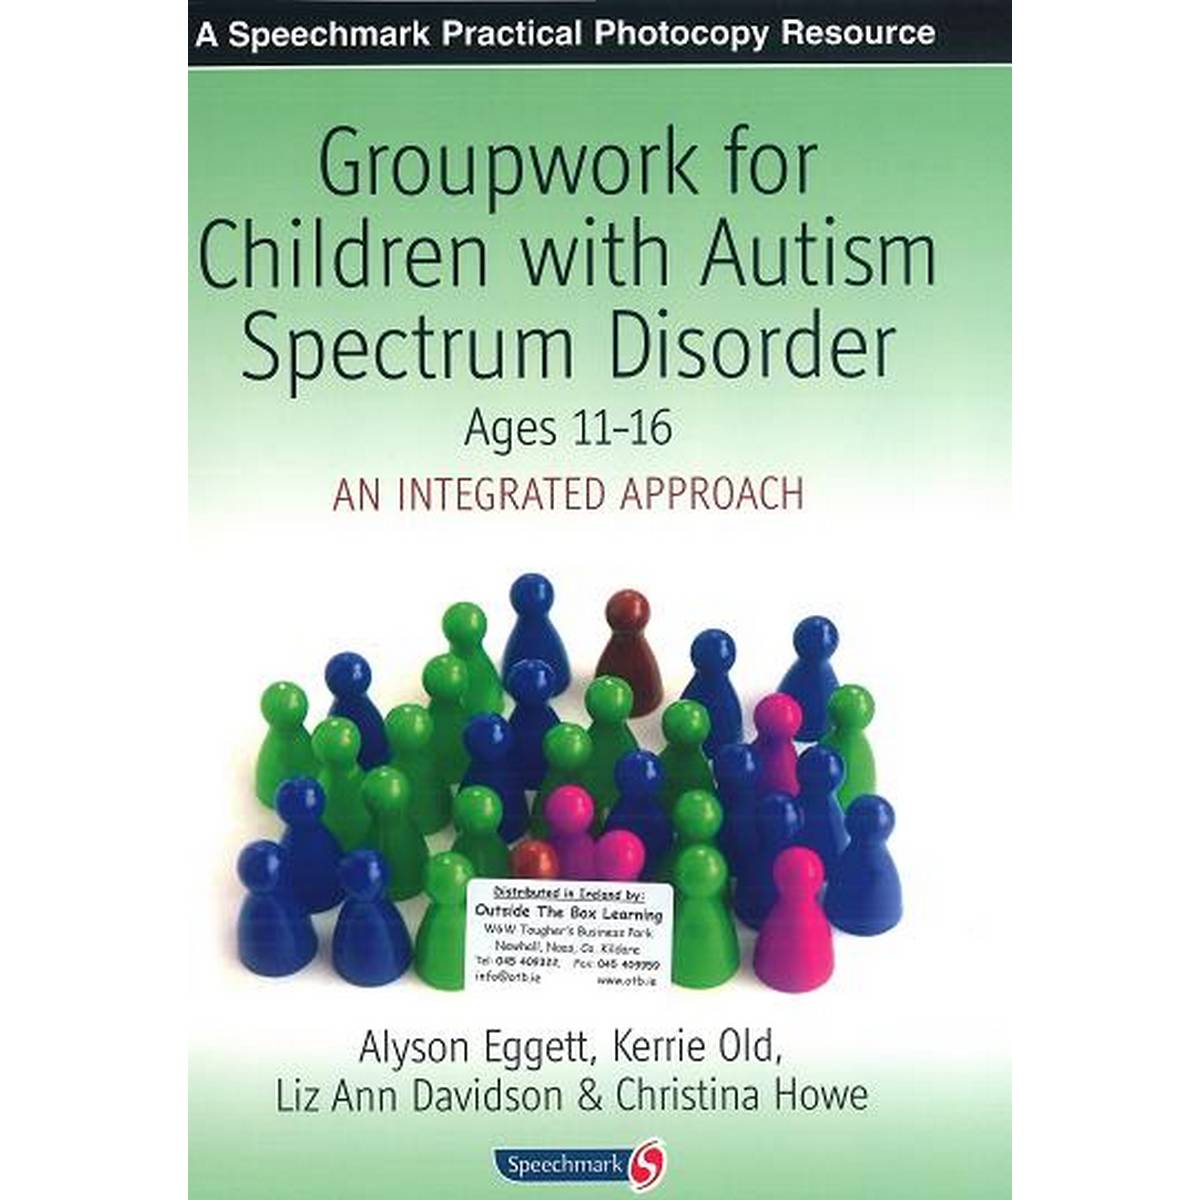 Groupwork for Children with Autism Spectrum Disorder (11-16)